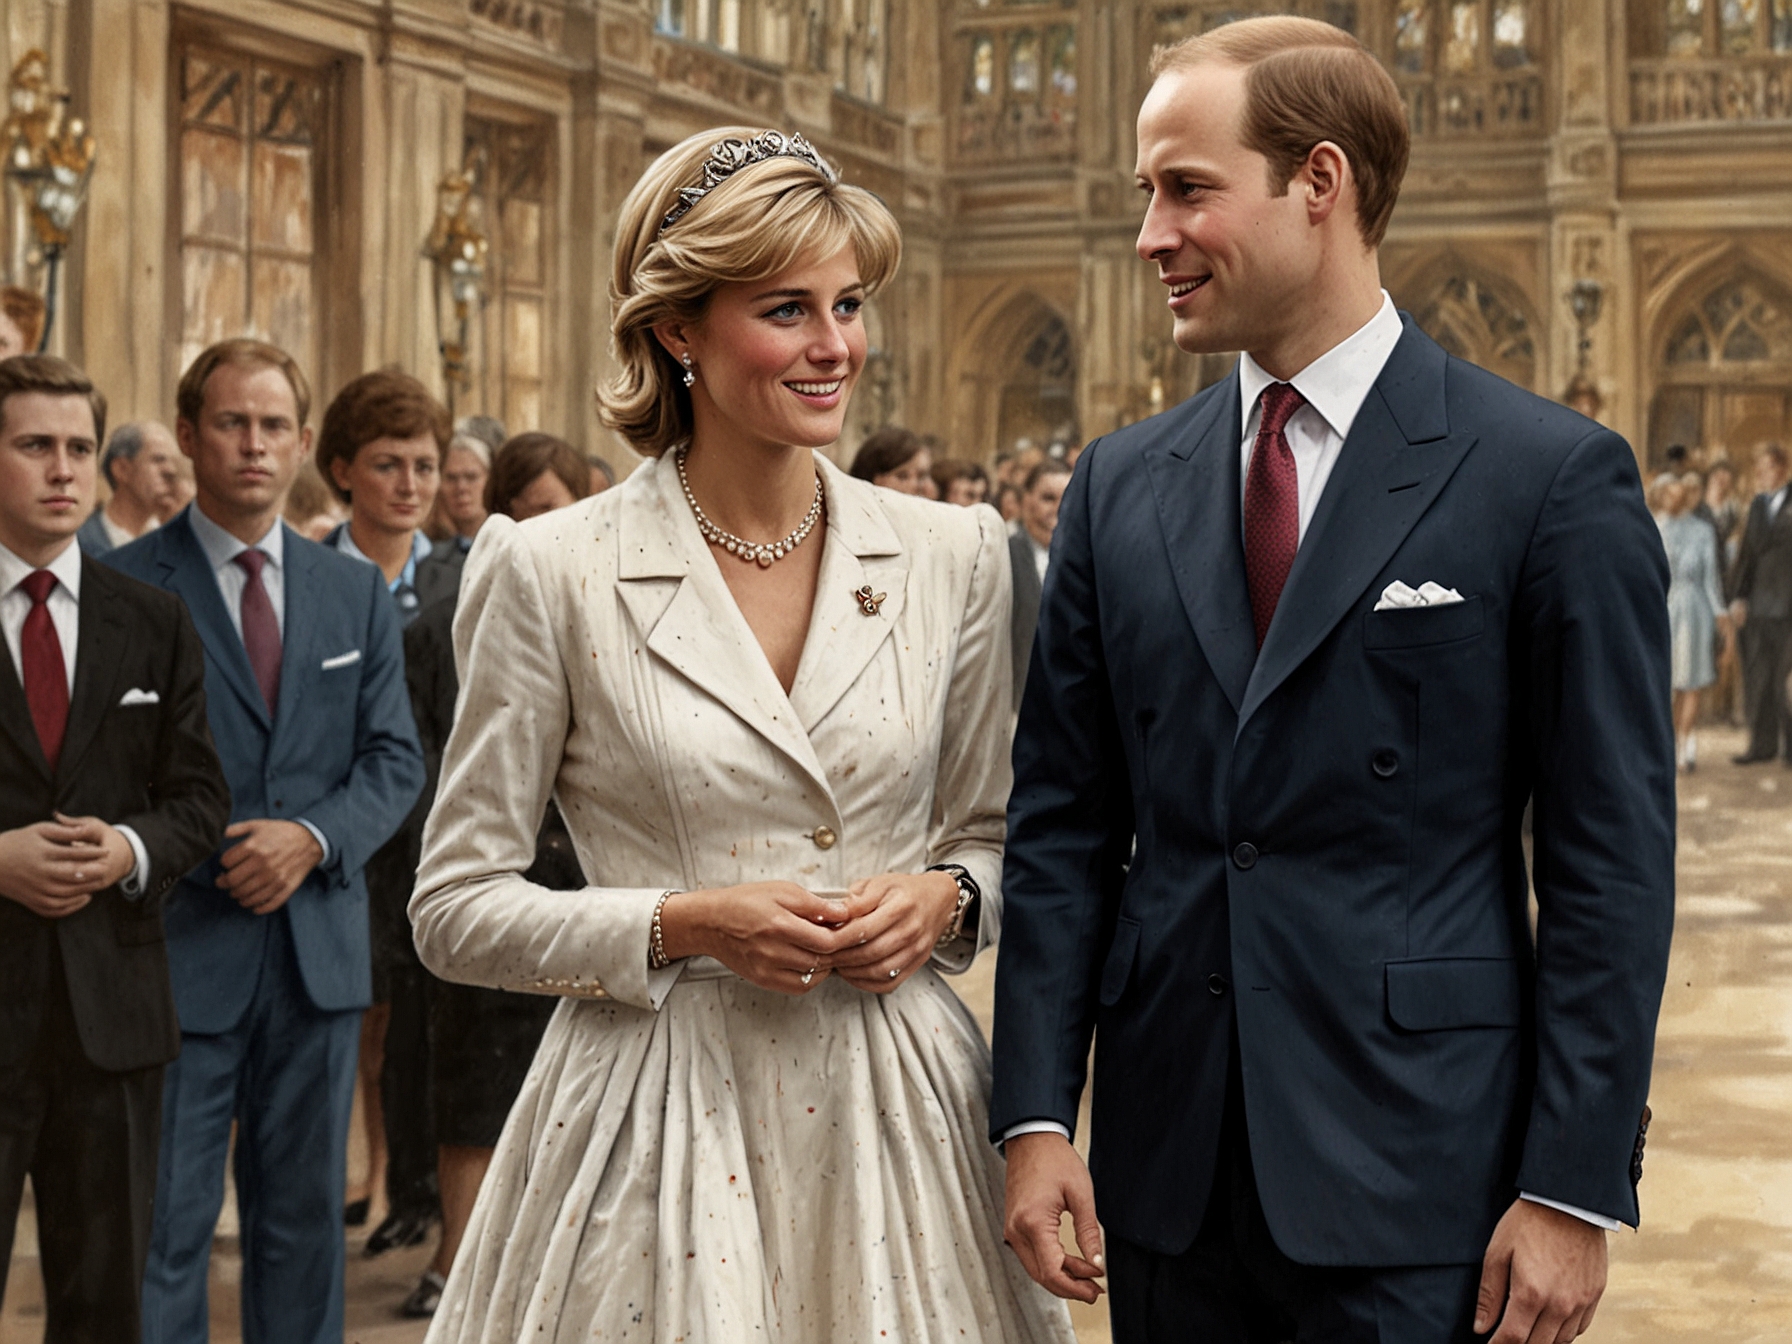 The Princess of Wales, appearing composed and graceful, alongside Prince William in a public event, exemplifying her strength under the ongoing family cancer crisis.